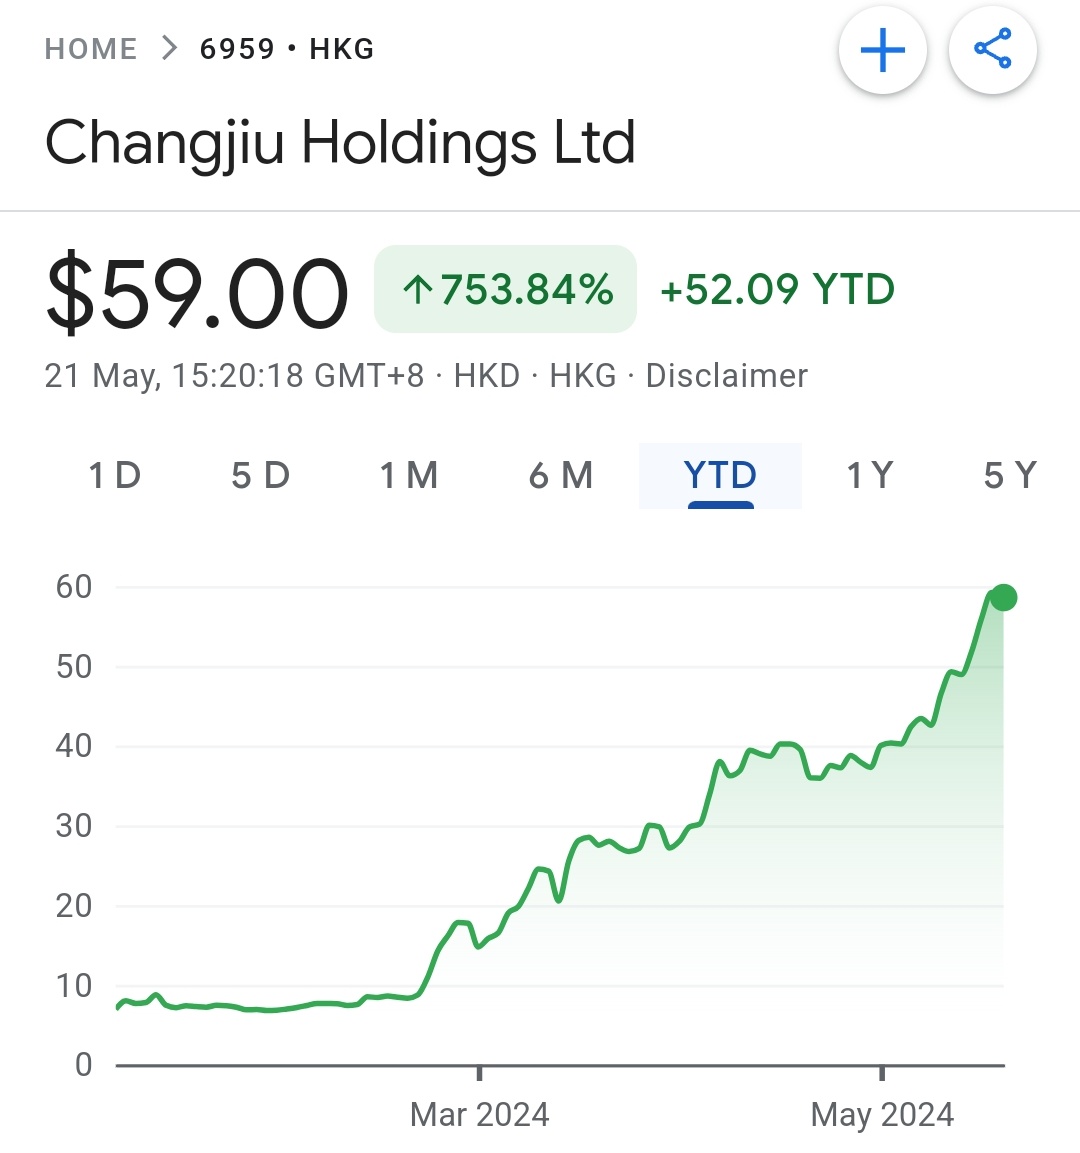 LoL 8x up since IPO in Jan 24 for a usd20m net income company that provides pledged vehicle monitoring services in China (for banks that lend to dealerships to finance inventory). 

Basically a rfid tag and lockbox to keep keys and papers. Nice biz. Yours for 75x PE